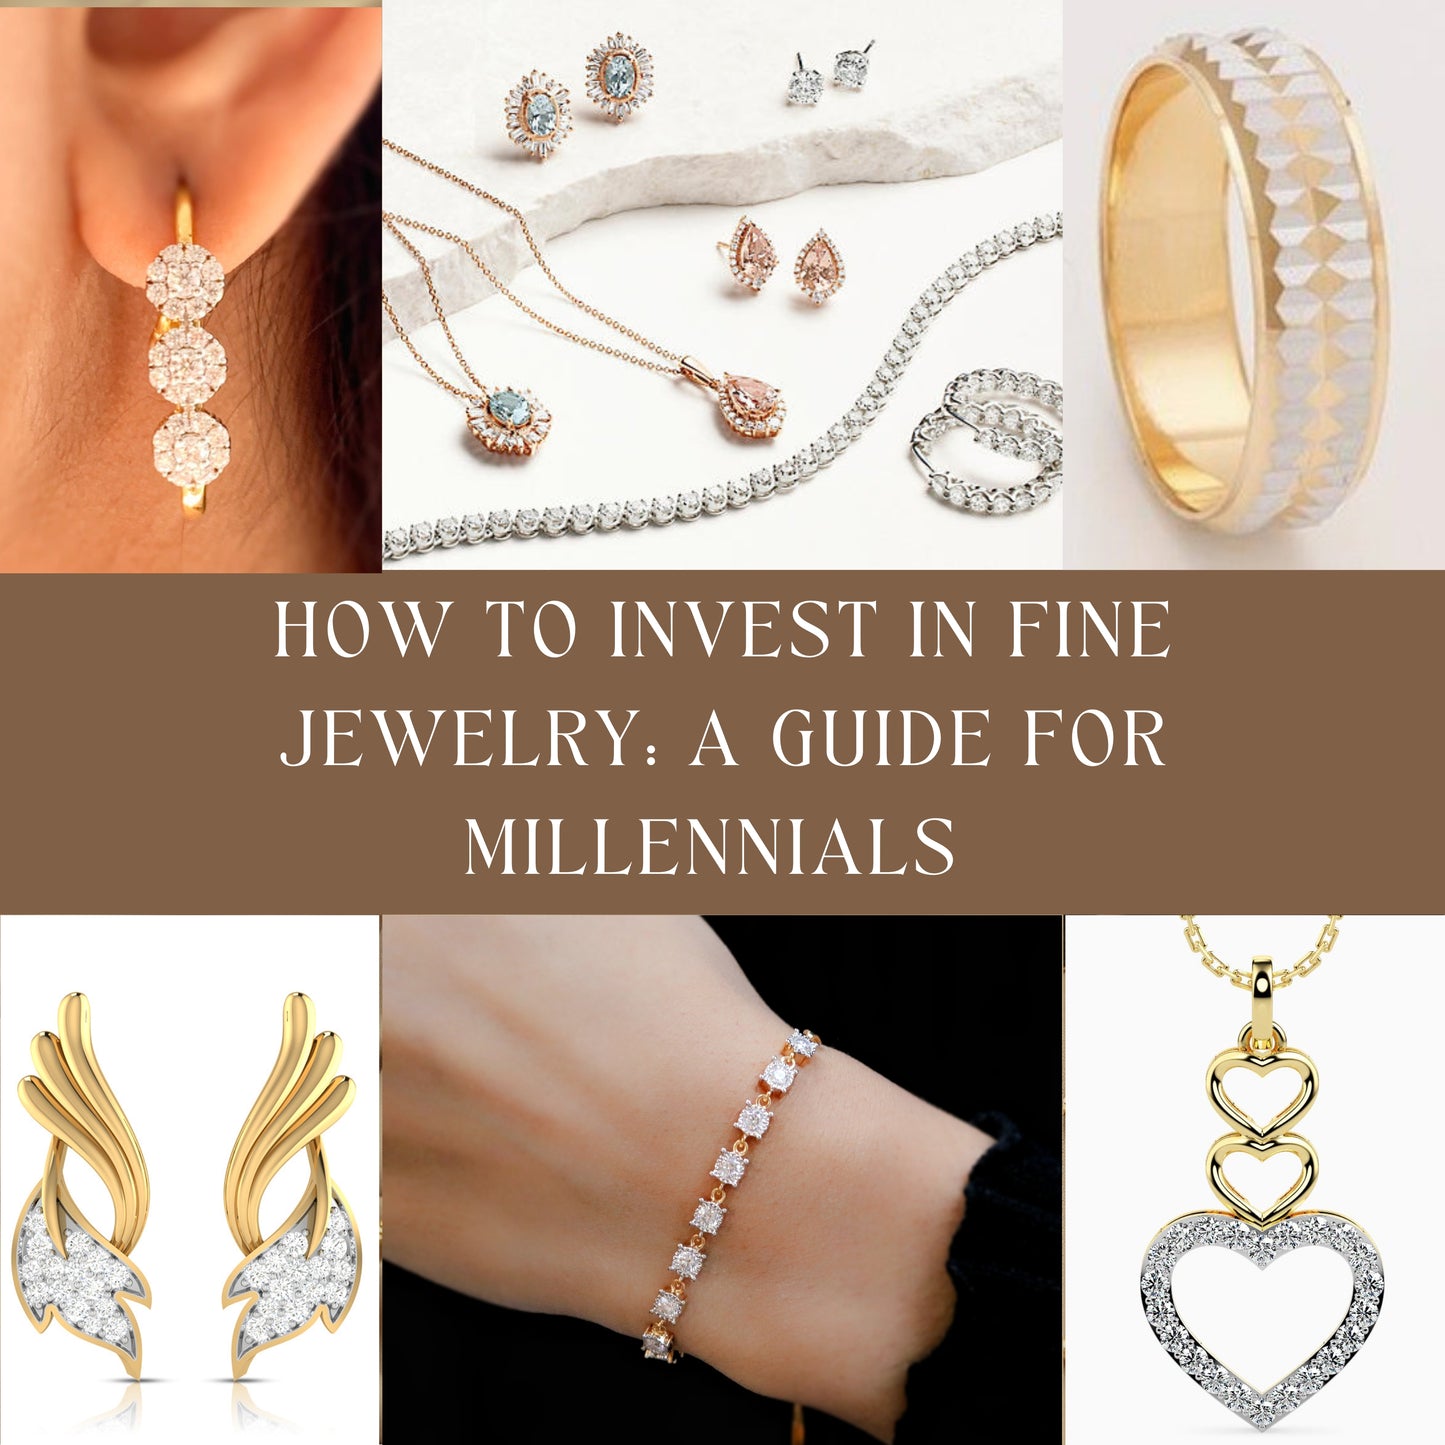 Investing in Fine Jewelry: A Guide for Millennials